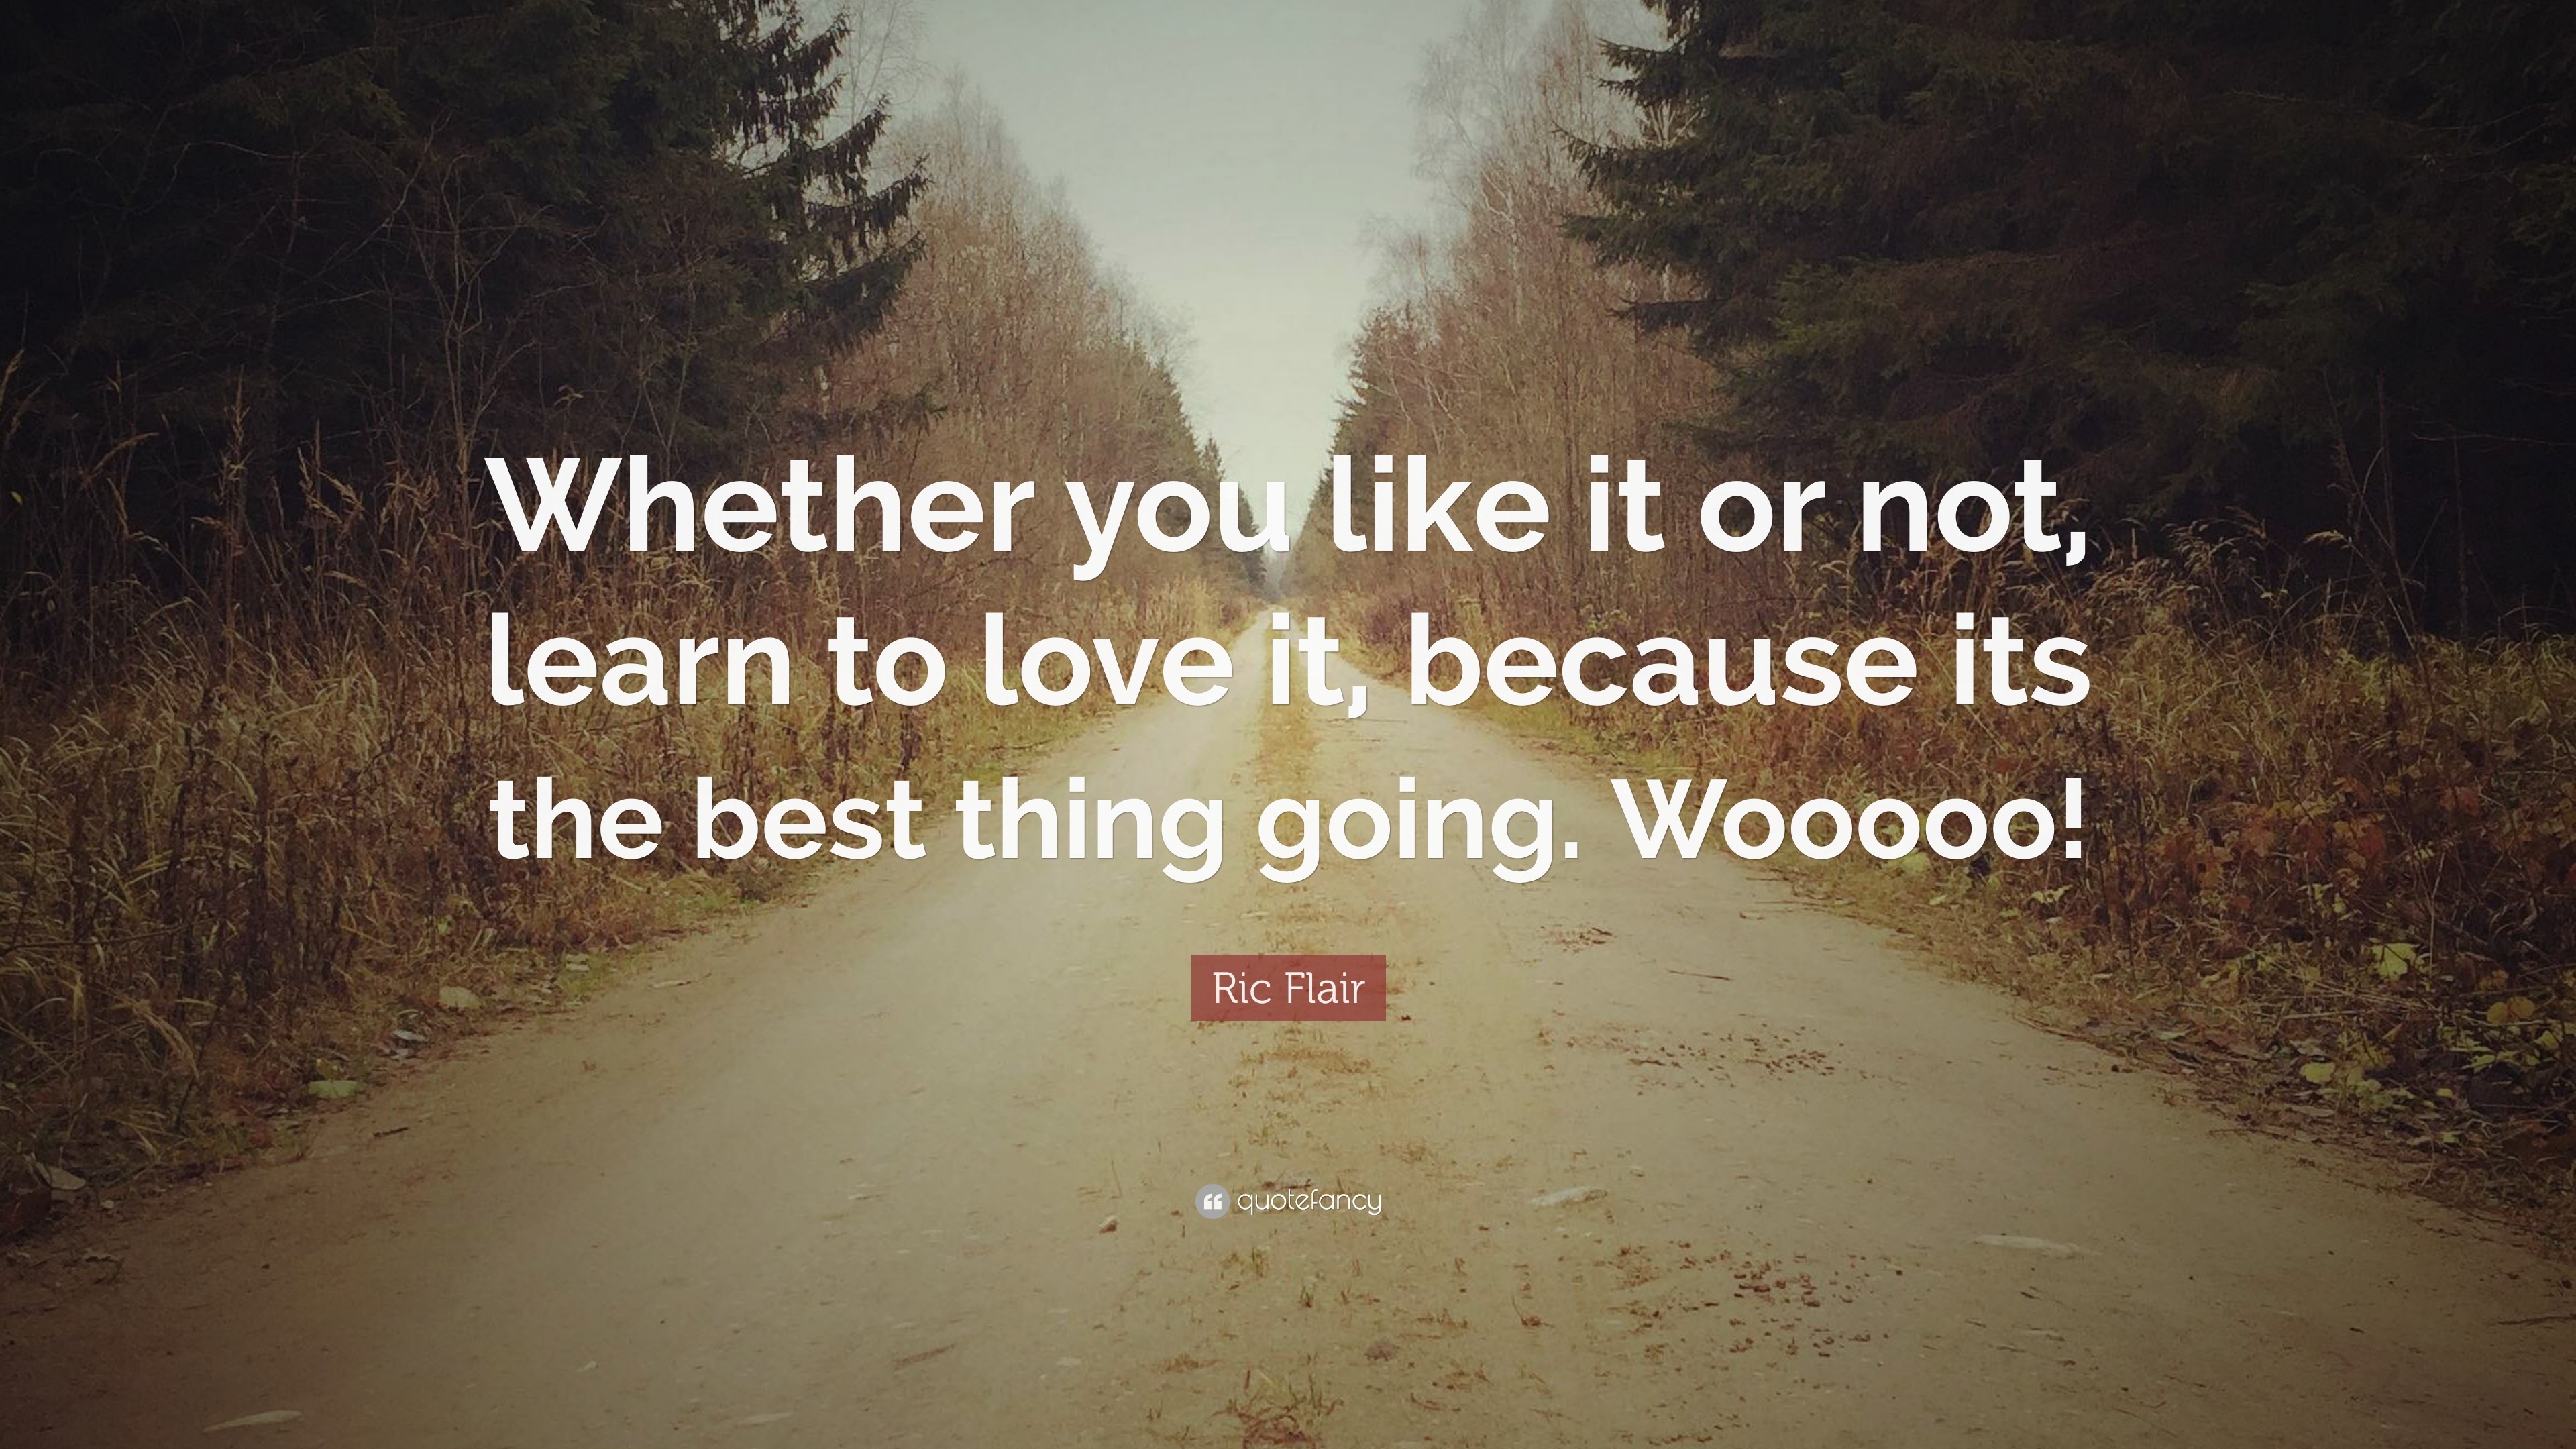 3840x2160 Ric Flair Quote: “Whether you like it or not, learn to love it